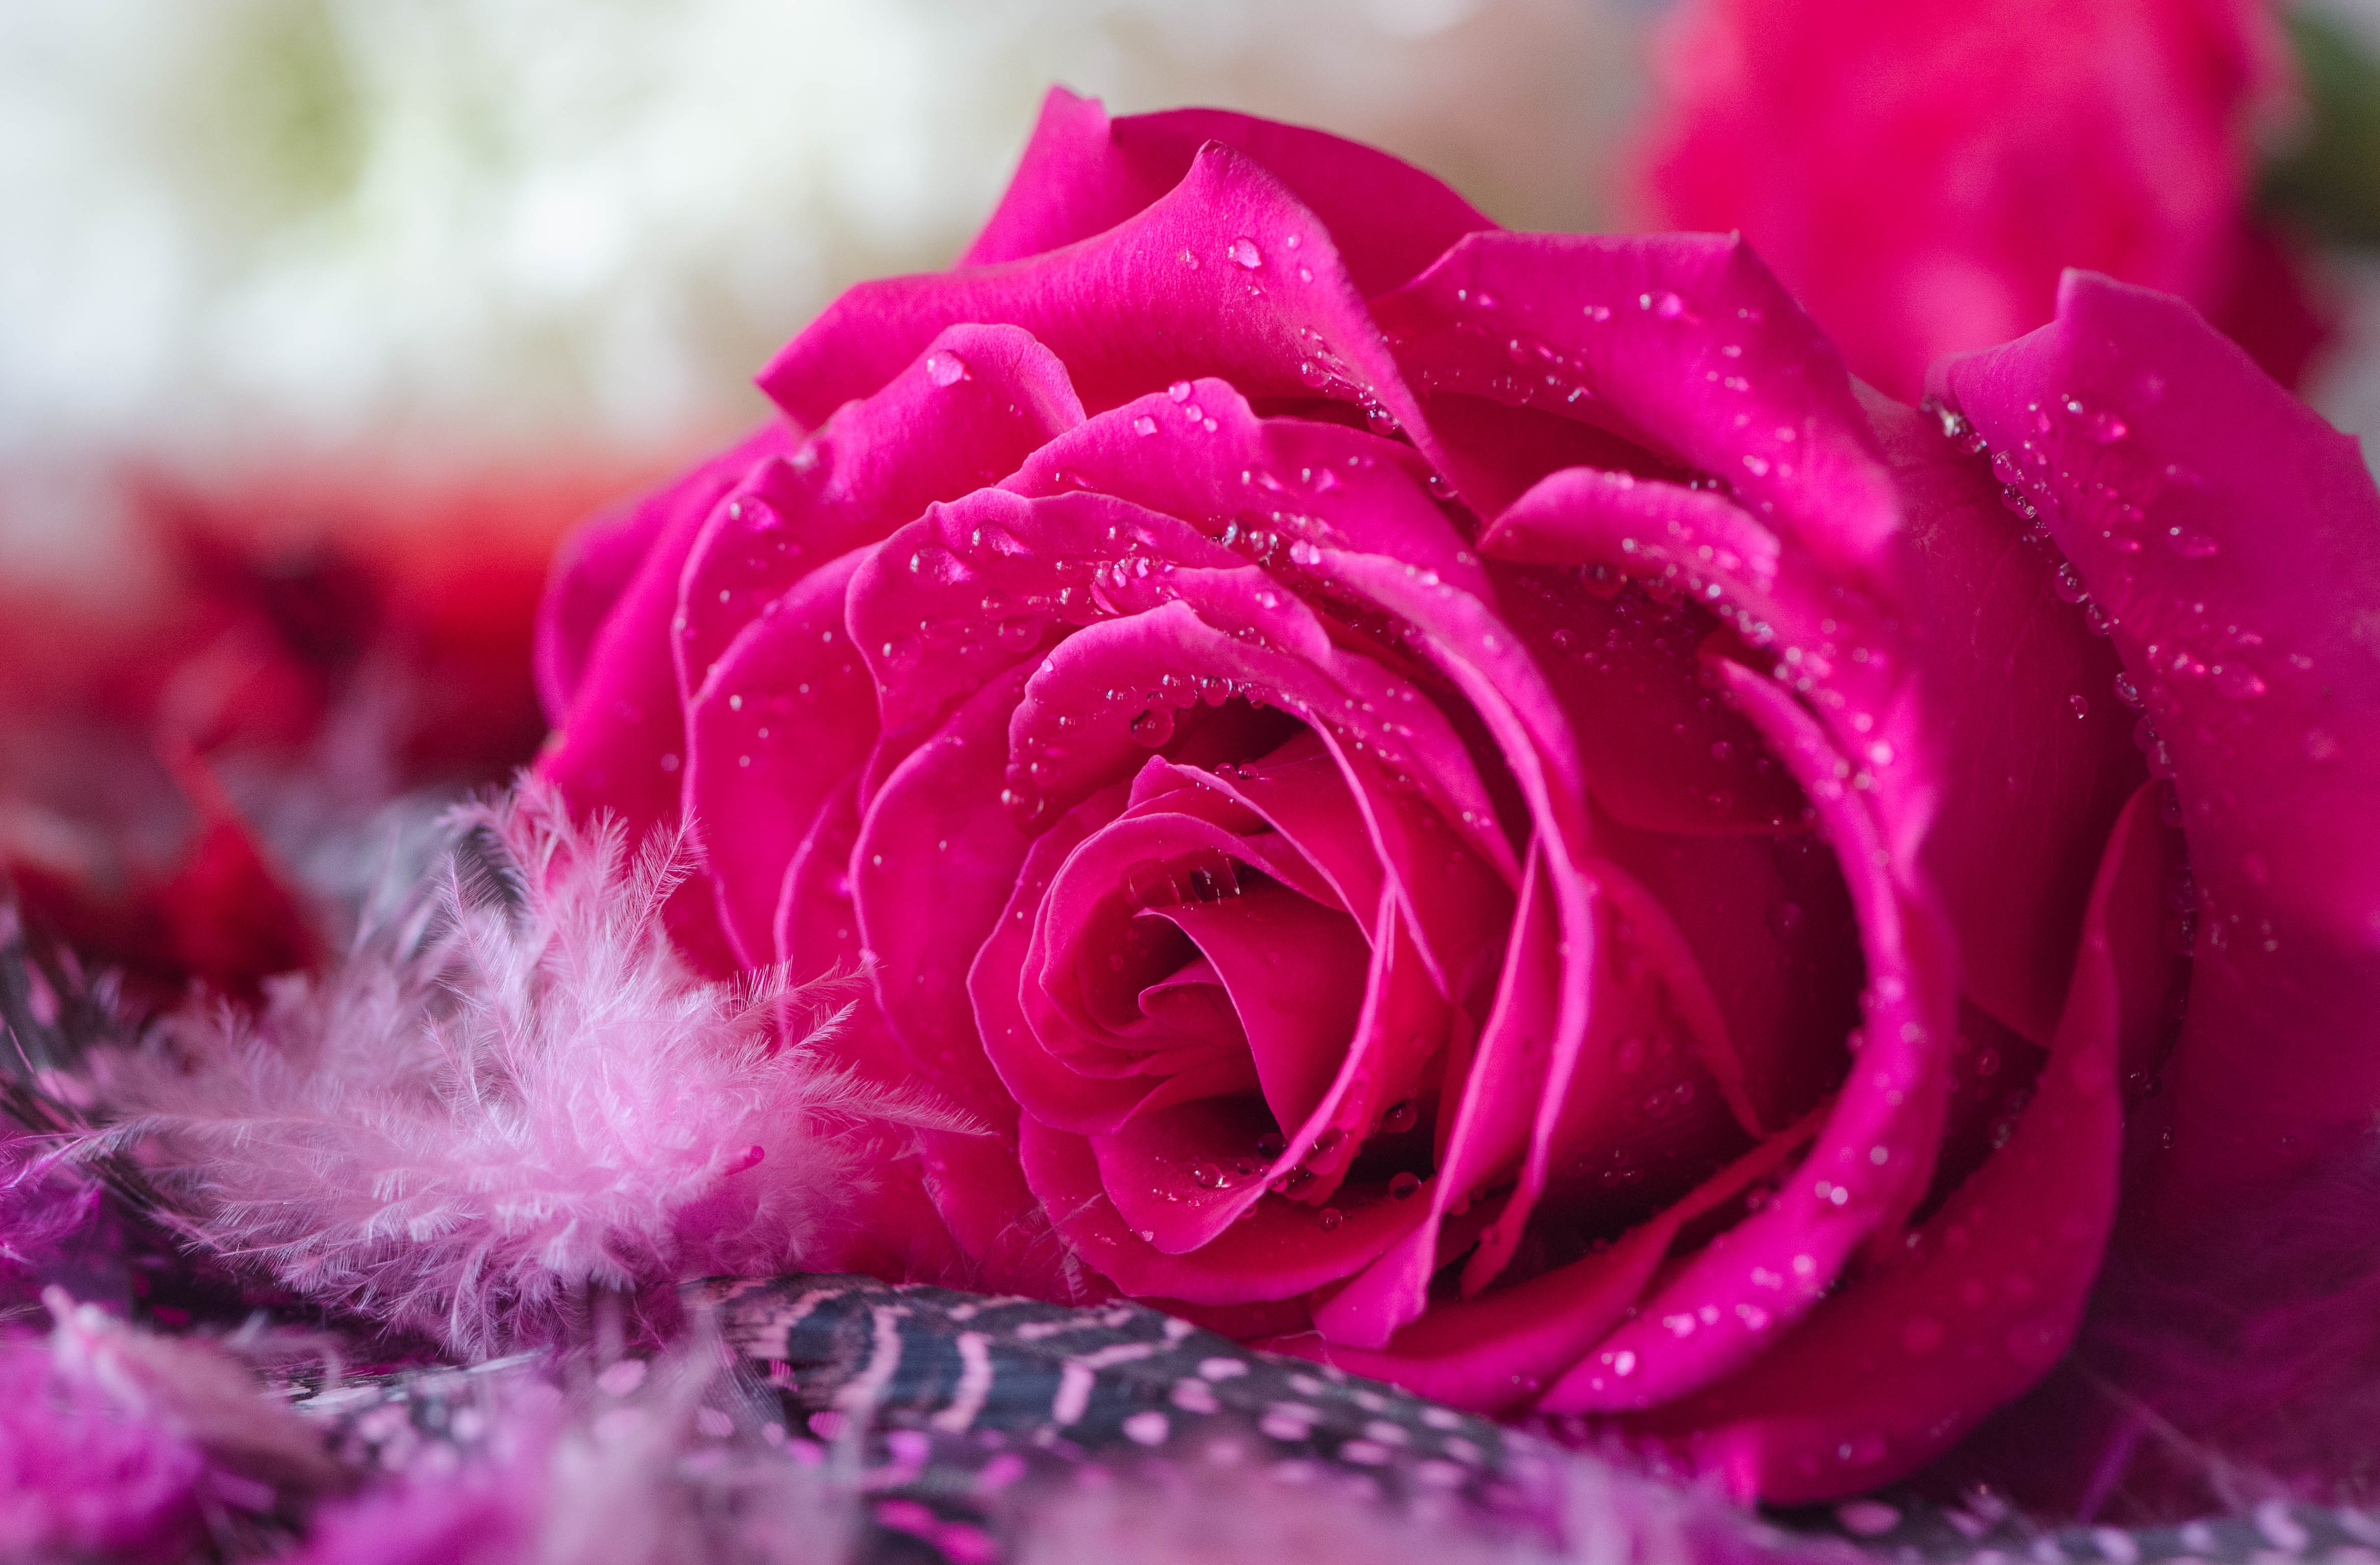 13400 Dark Pink Rose Stock Photos Pictures  RoyaltyFree Images  iStock